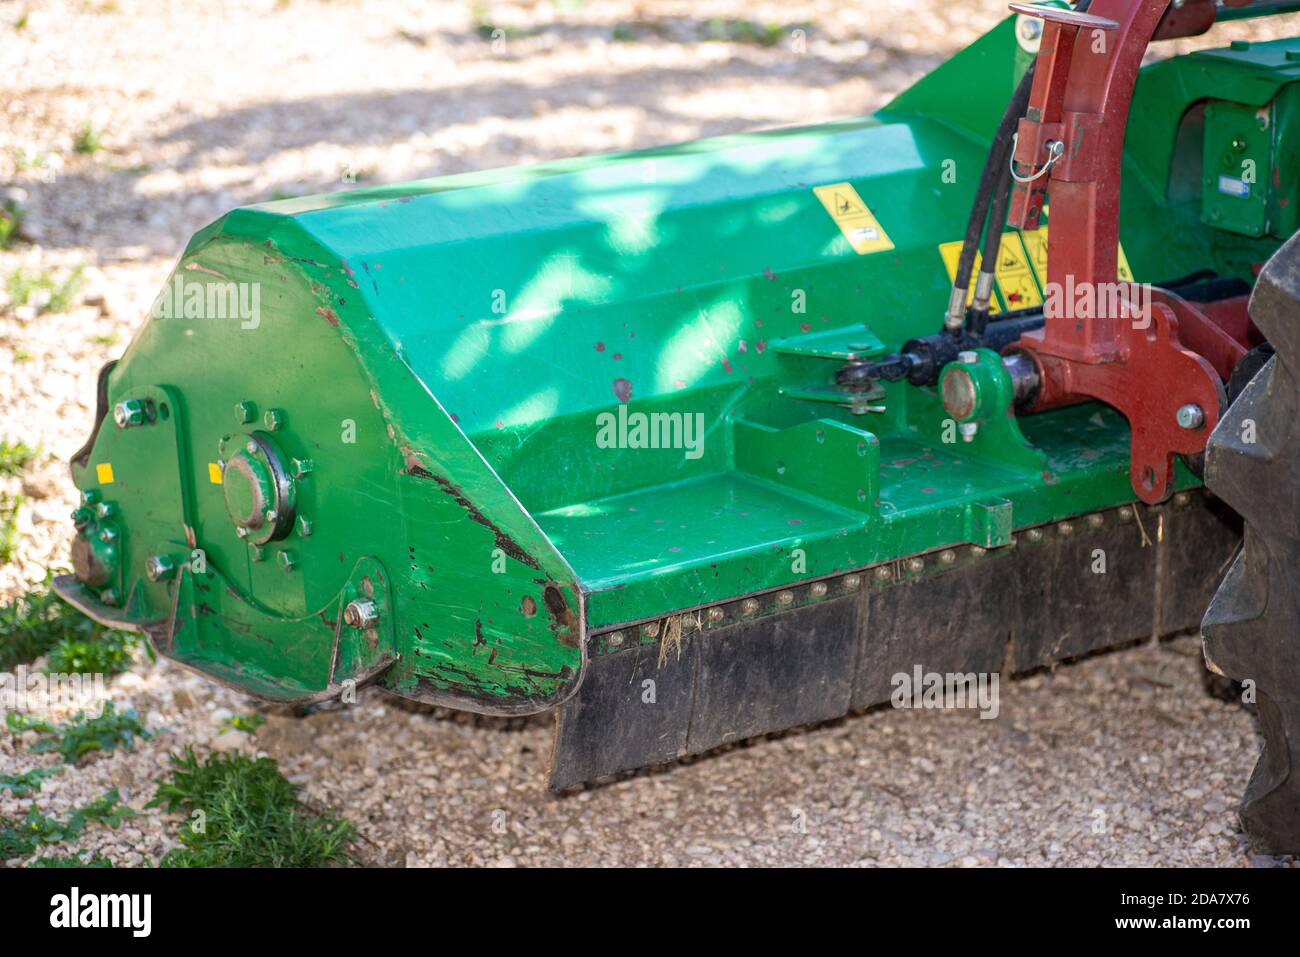 terni, italy may 24 2020:stalk chopper for tractor, 2 meters wide Stock Photo